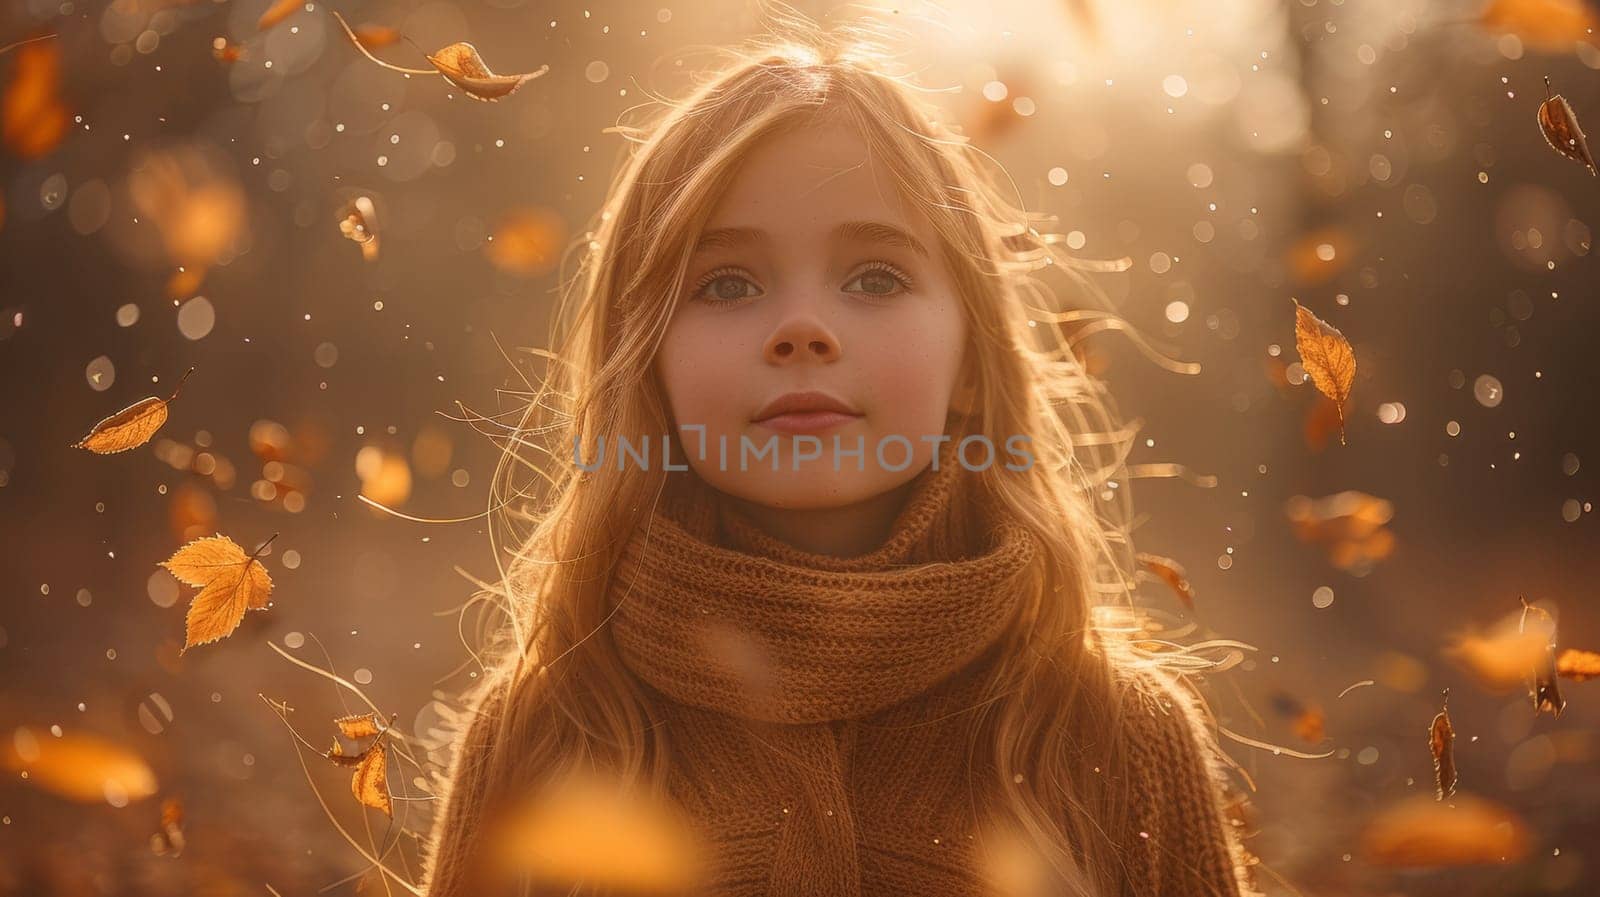 A young girl with blonde hair wearing a sweater in the rain, AI by starush